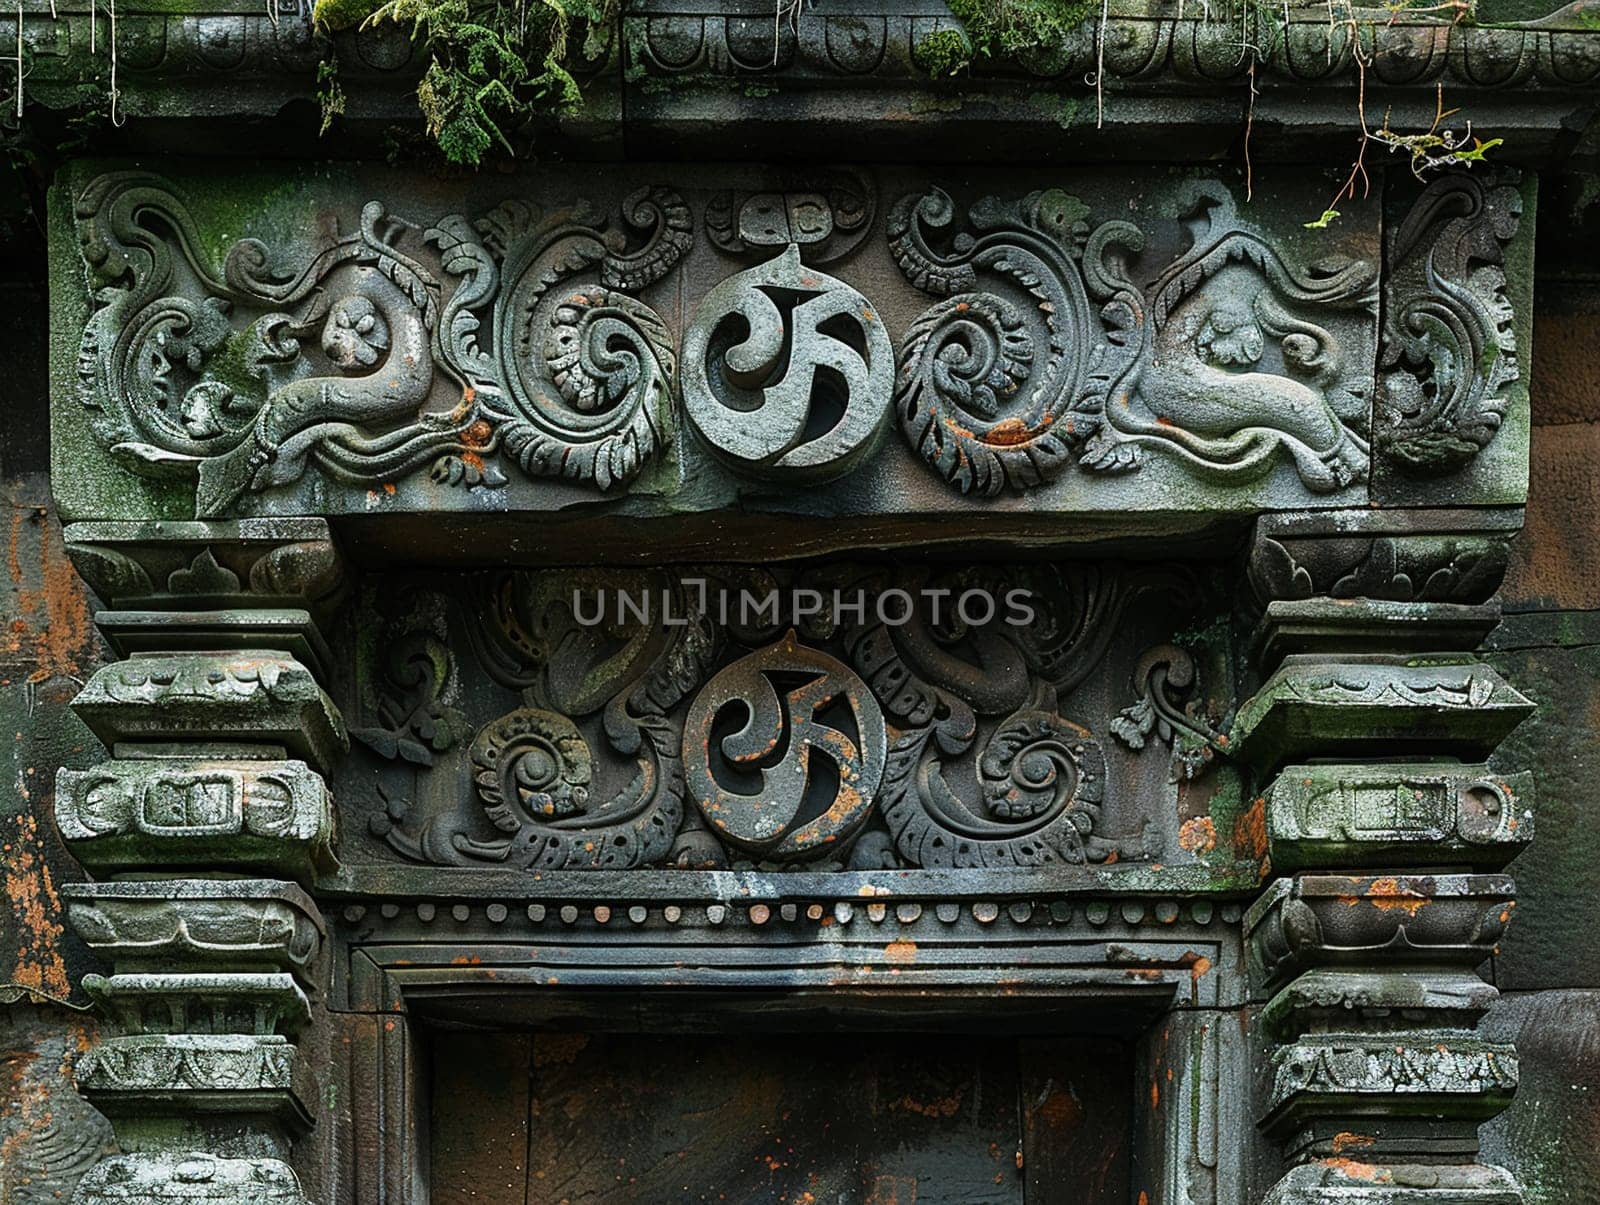 Hindu Om Symbol Adorning a Temple Entrance, The sacred sound's representation blends into the structure, inviting spiritual reflection.